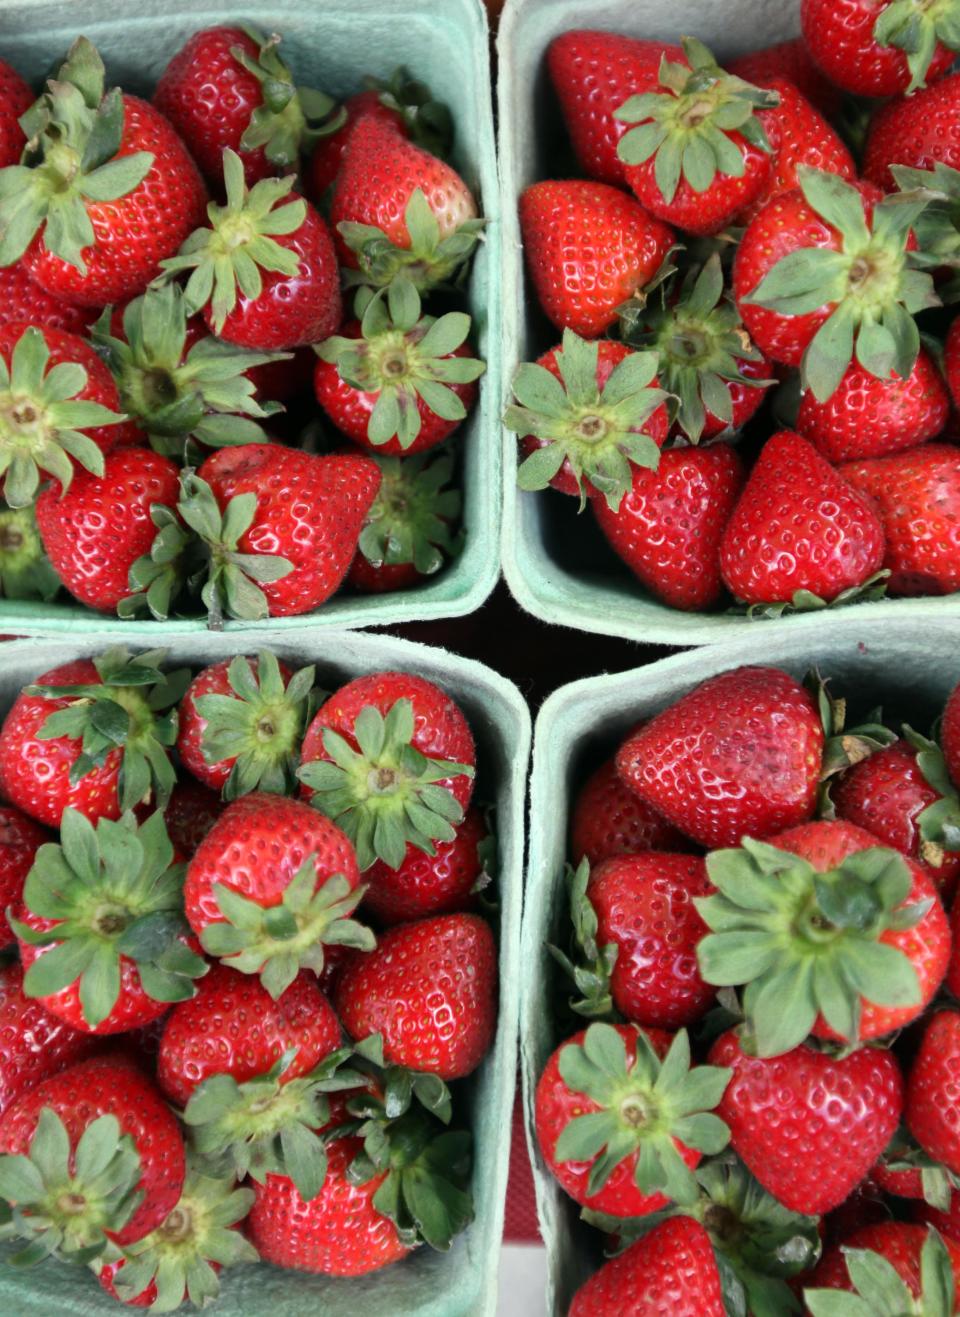 The spring always brings in fresh strawberries. These beauties were found in 2013 at the Wilmington Farmers’ Market, which also offers cafe seating under umbrellas and food trucks.